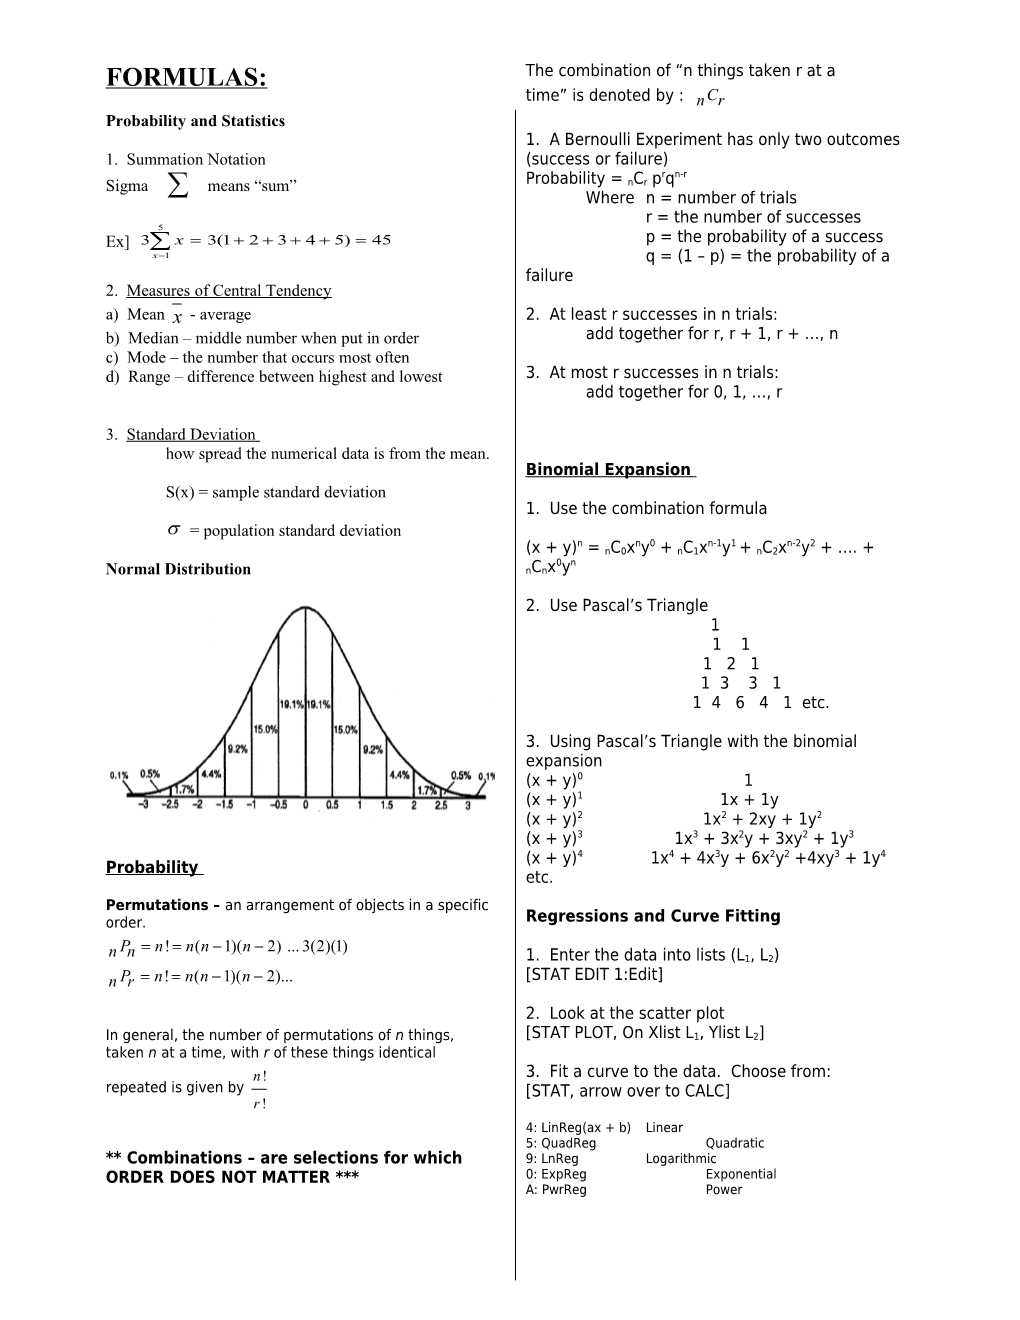 Probability and Statistics s1